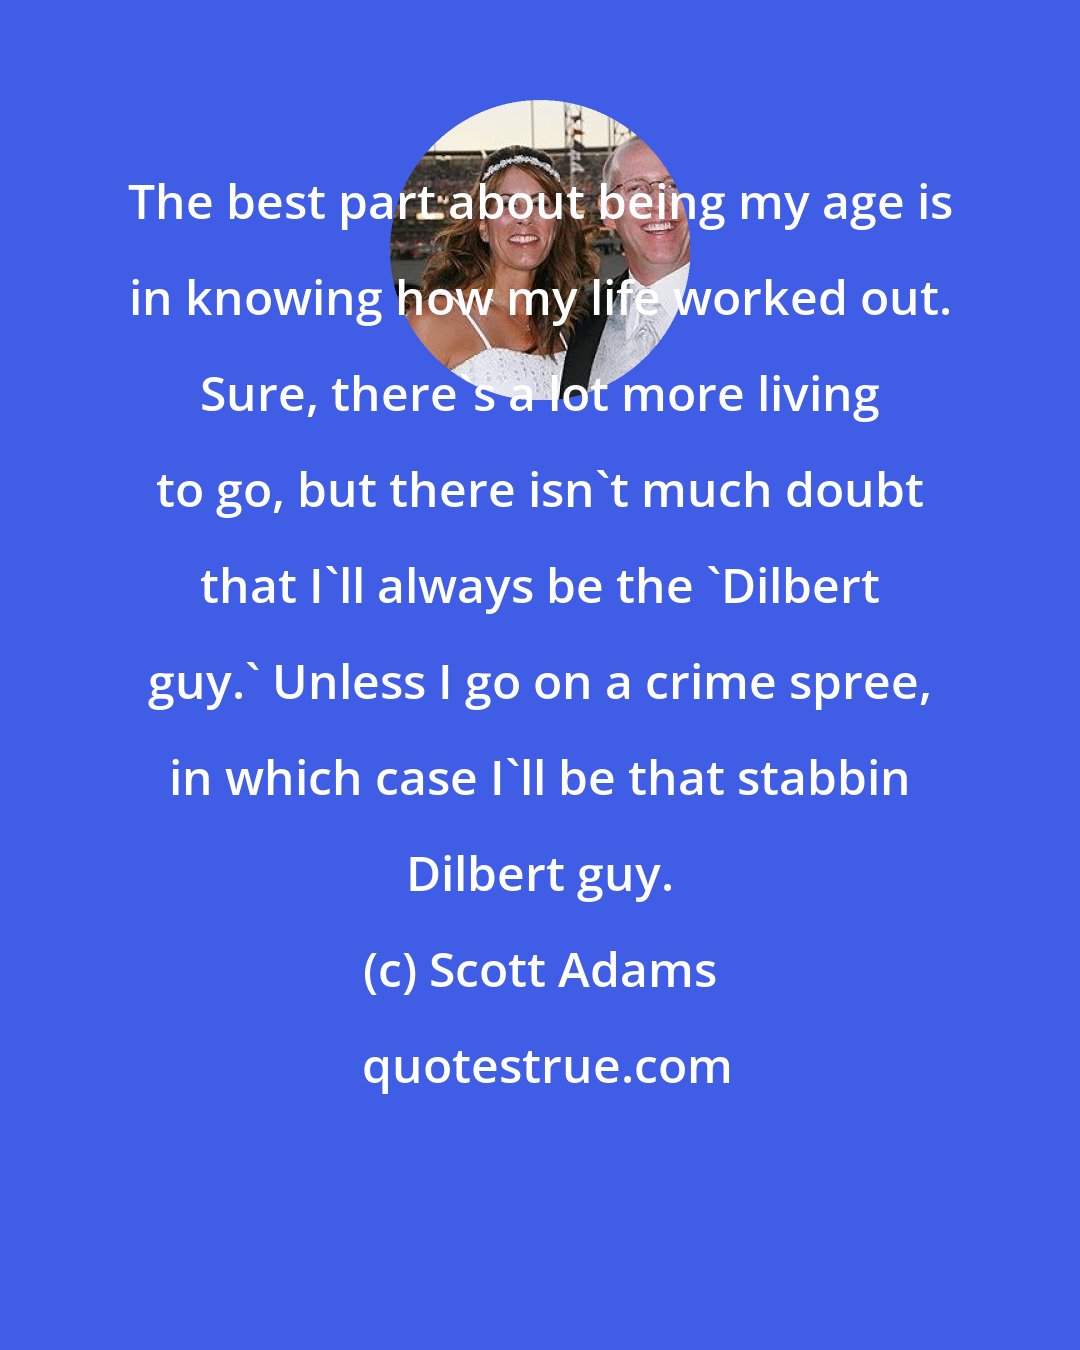 Scott Adams: The best part about being my age is in knowing how my life worked out. Sure, there's a lot more living to go, but there isn't much doubt that I'll always be the 'Dilbert guy.' Unless I go on a crime spree, in which case I'll be that stabbin Dilbert guy.